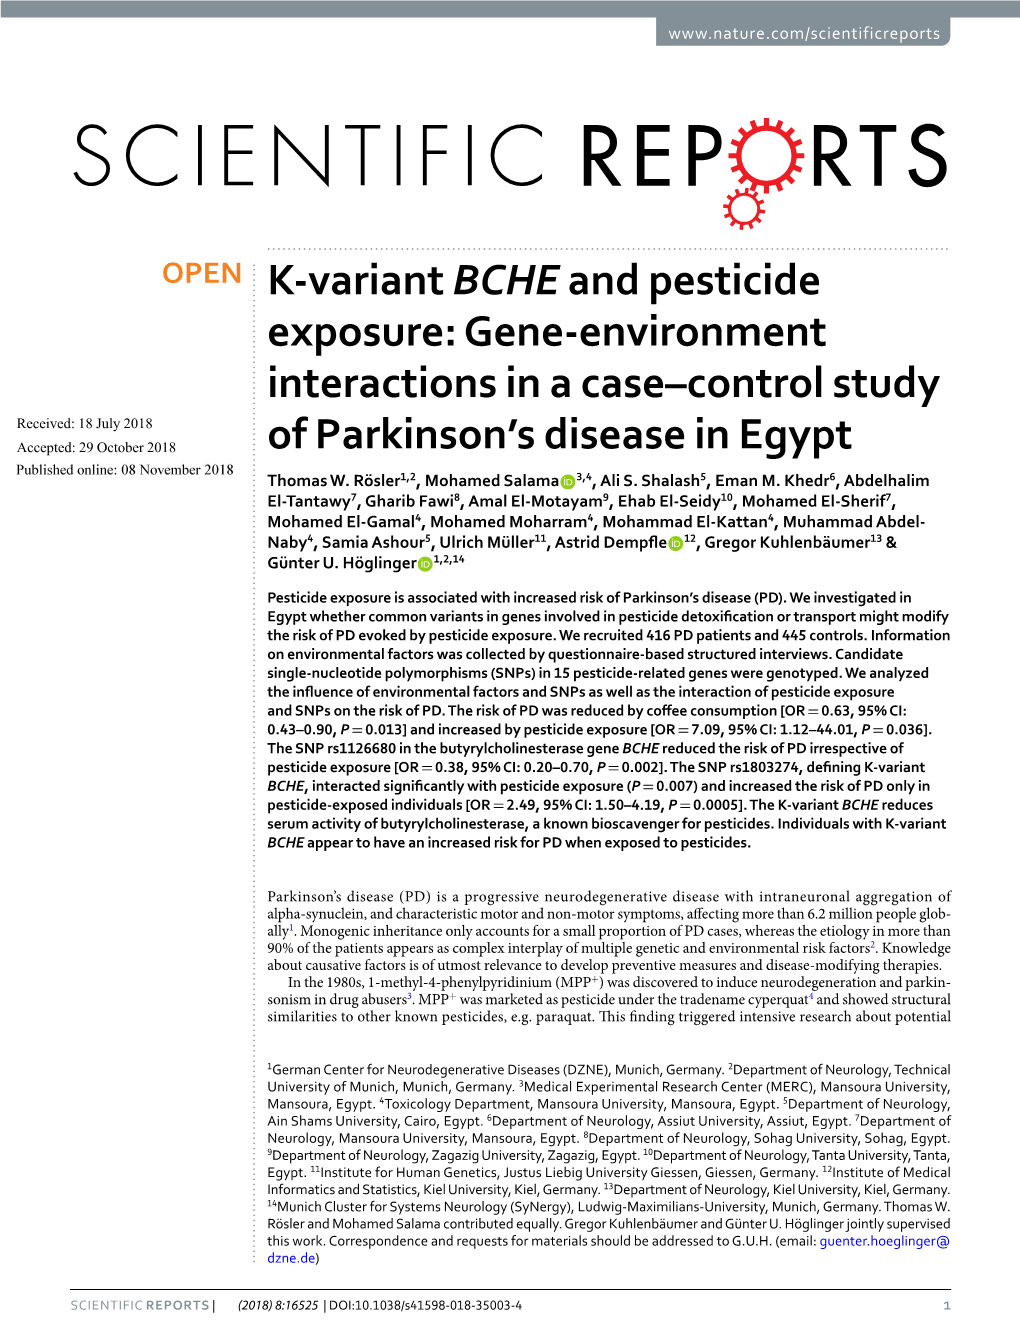 K-Variant BCHE and Pesticide Exposure